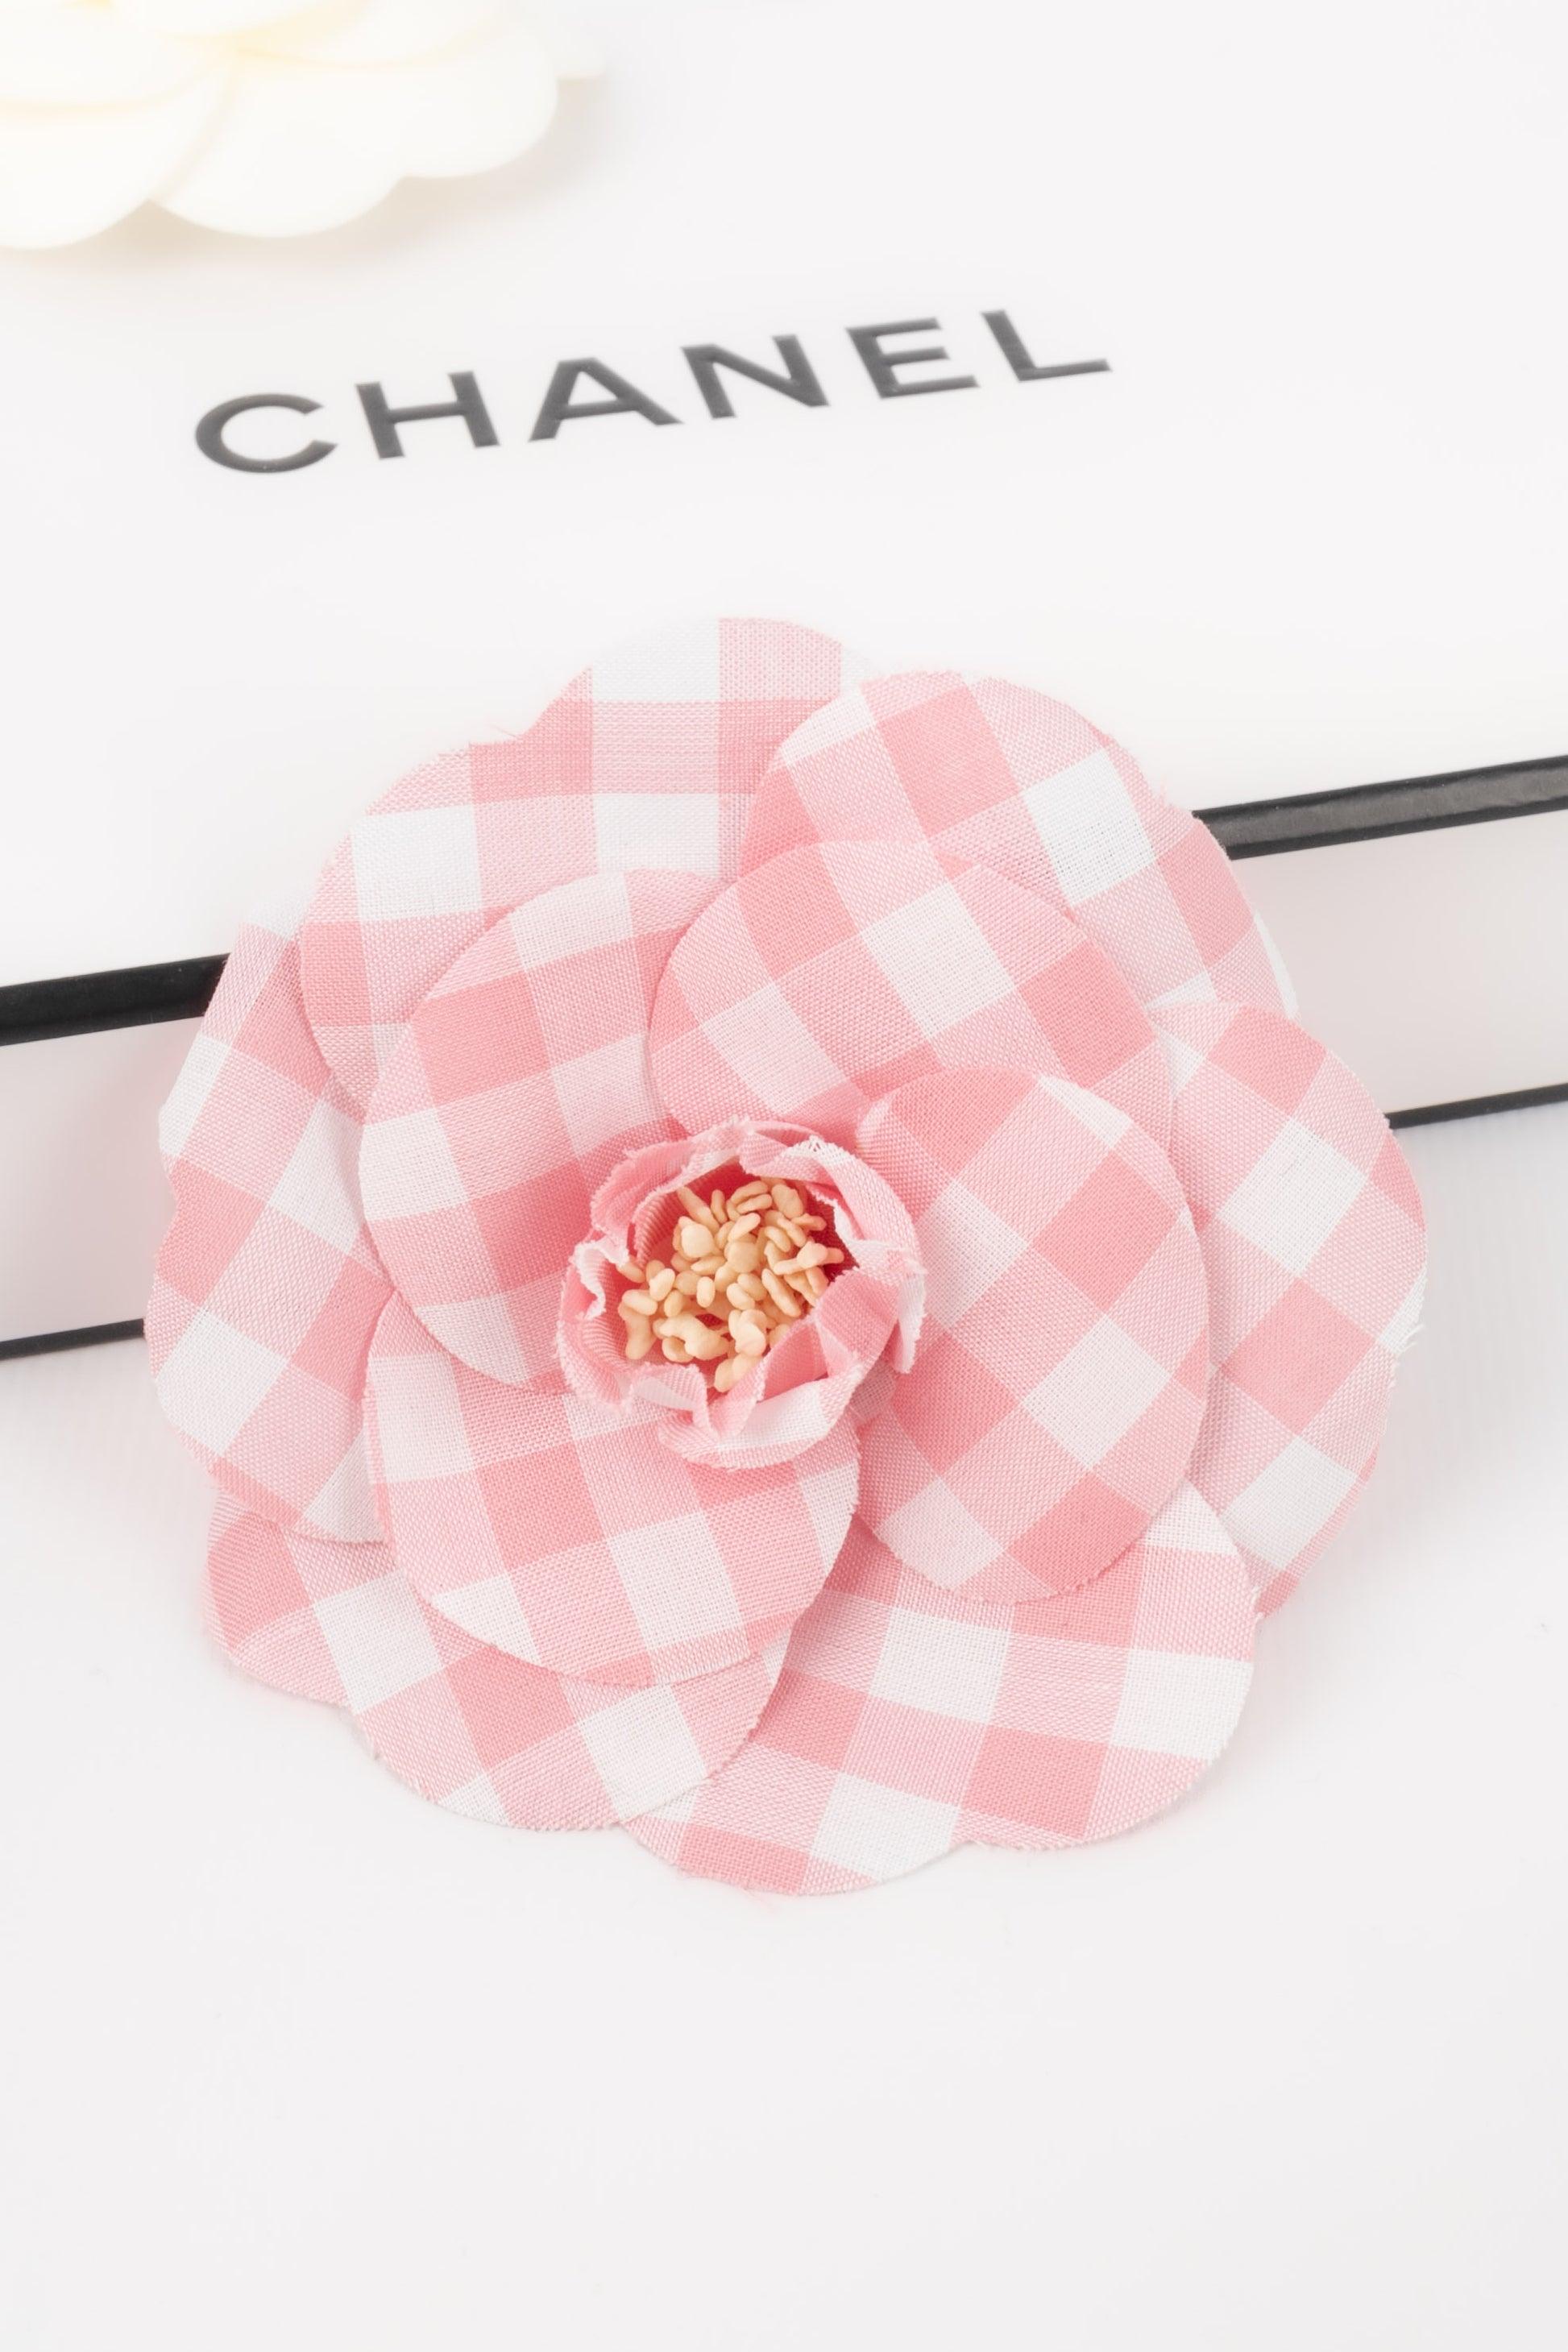 Chanel Brooch Camellia Made of Pink and White Gingham Fabric, 1990s For Sale 1